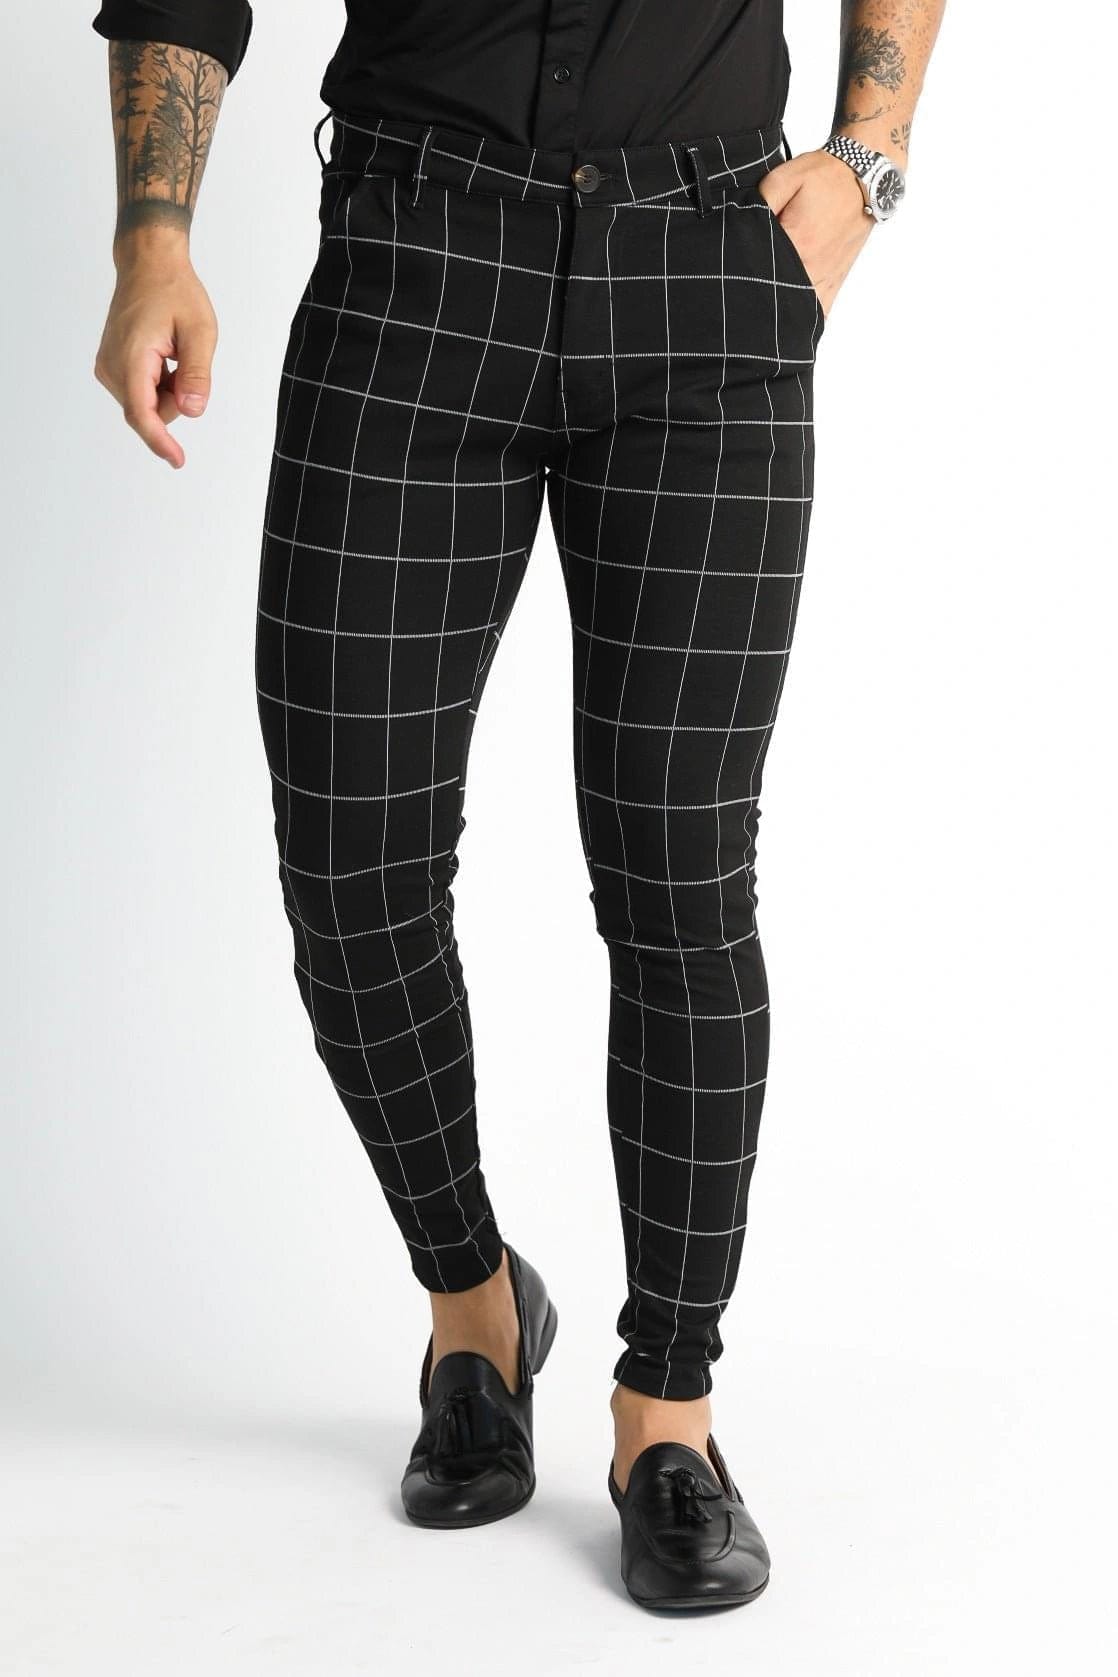 Plaid Pants  Outfit of the Day in Style